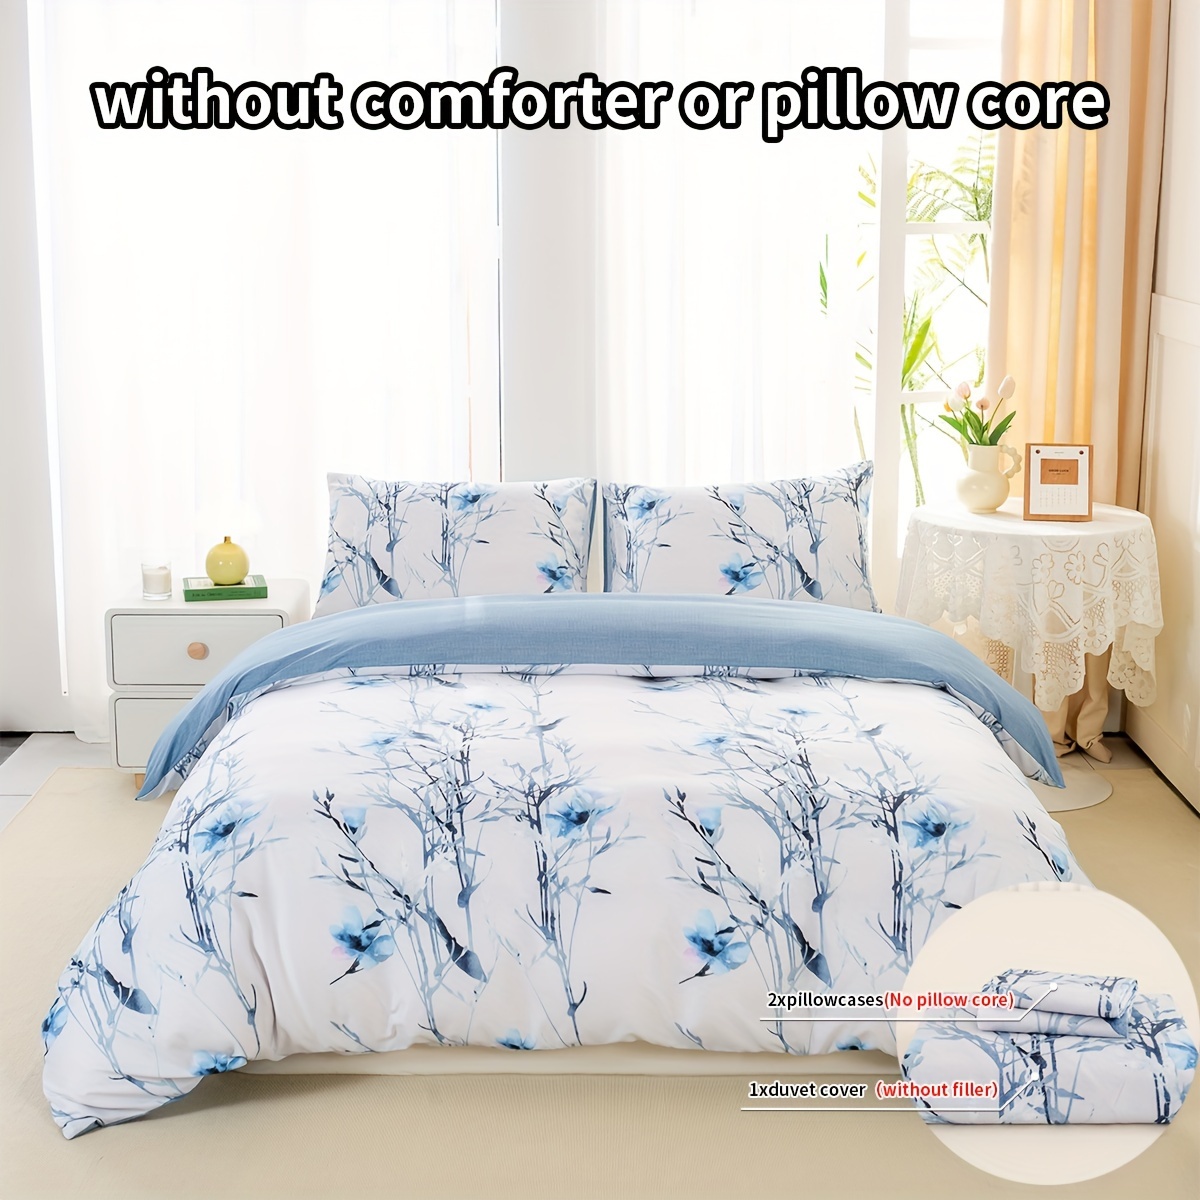 

3pcs Duvet Cover Set, Blue Floral Print, Ultra-soft Microfiber Duvet Cover With 2 Pillowcases, Blue And White Floral Branches Design, Breathable & Machine Washable